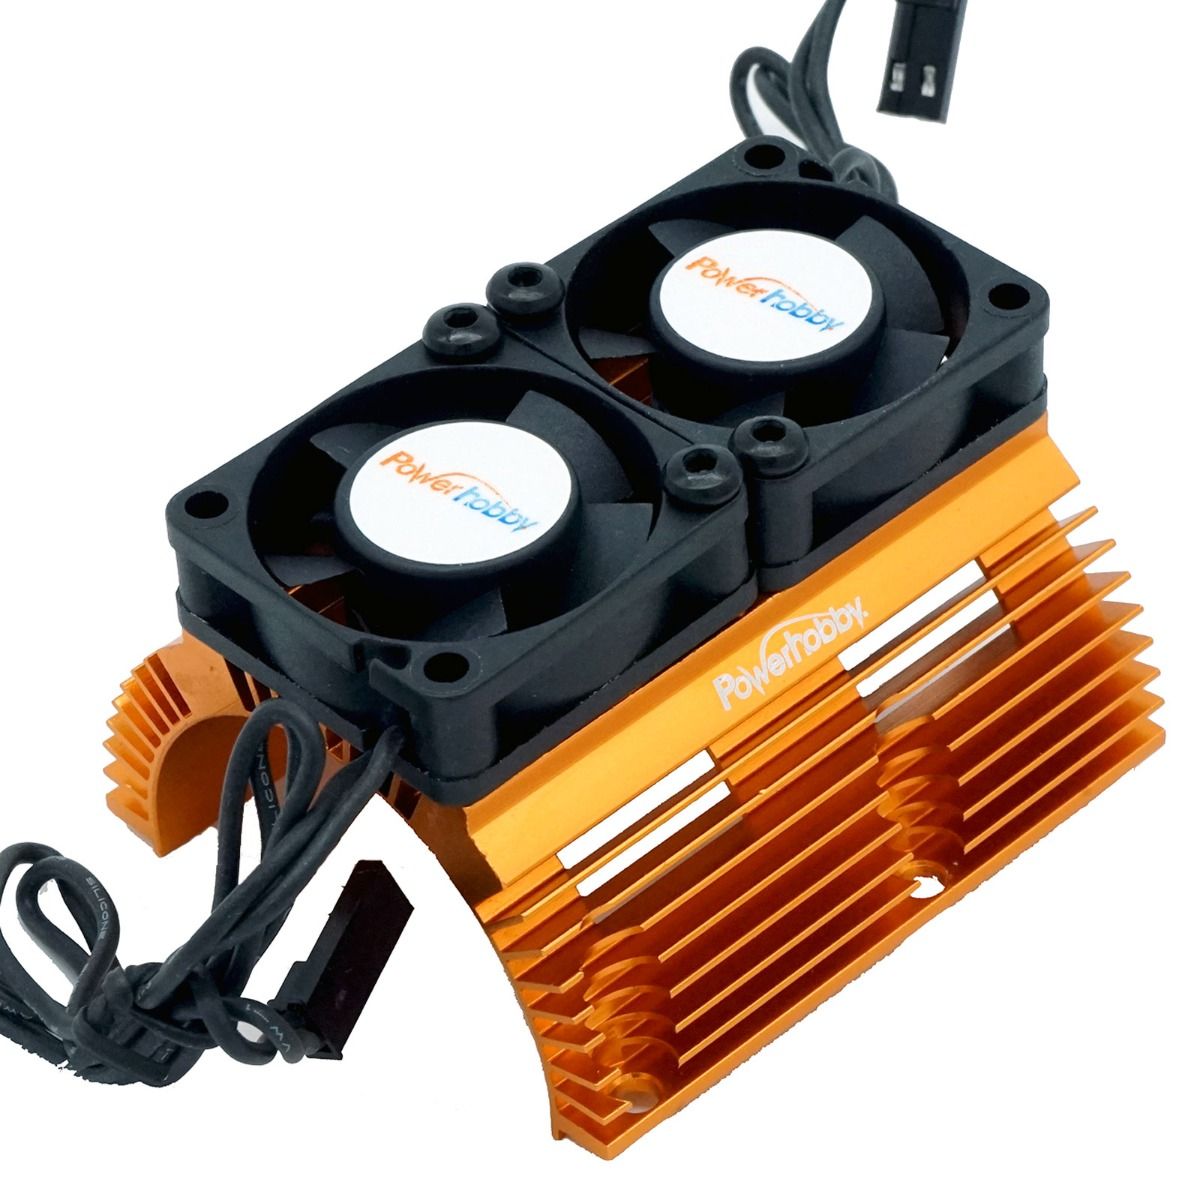 Power Hobby Heat Sink with Twin Turbo High Speed Cooling Fans (Assorted Colors)